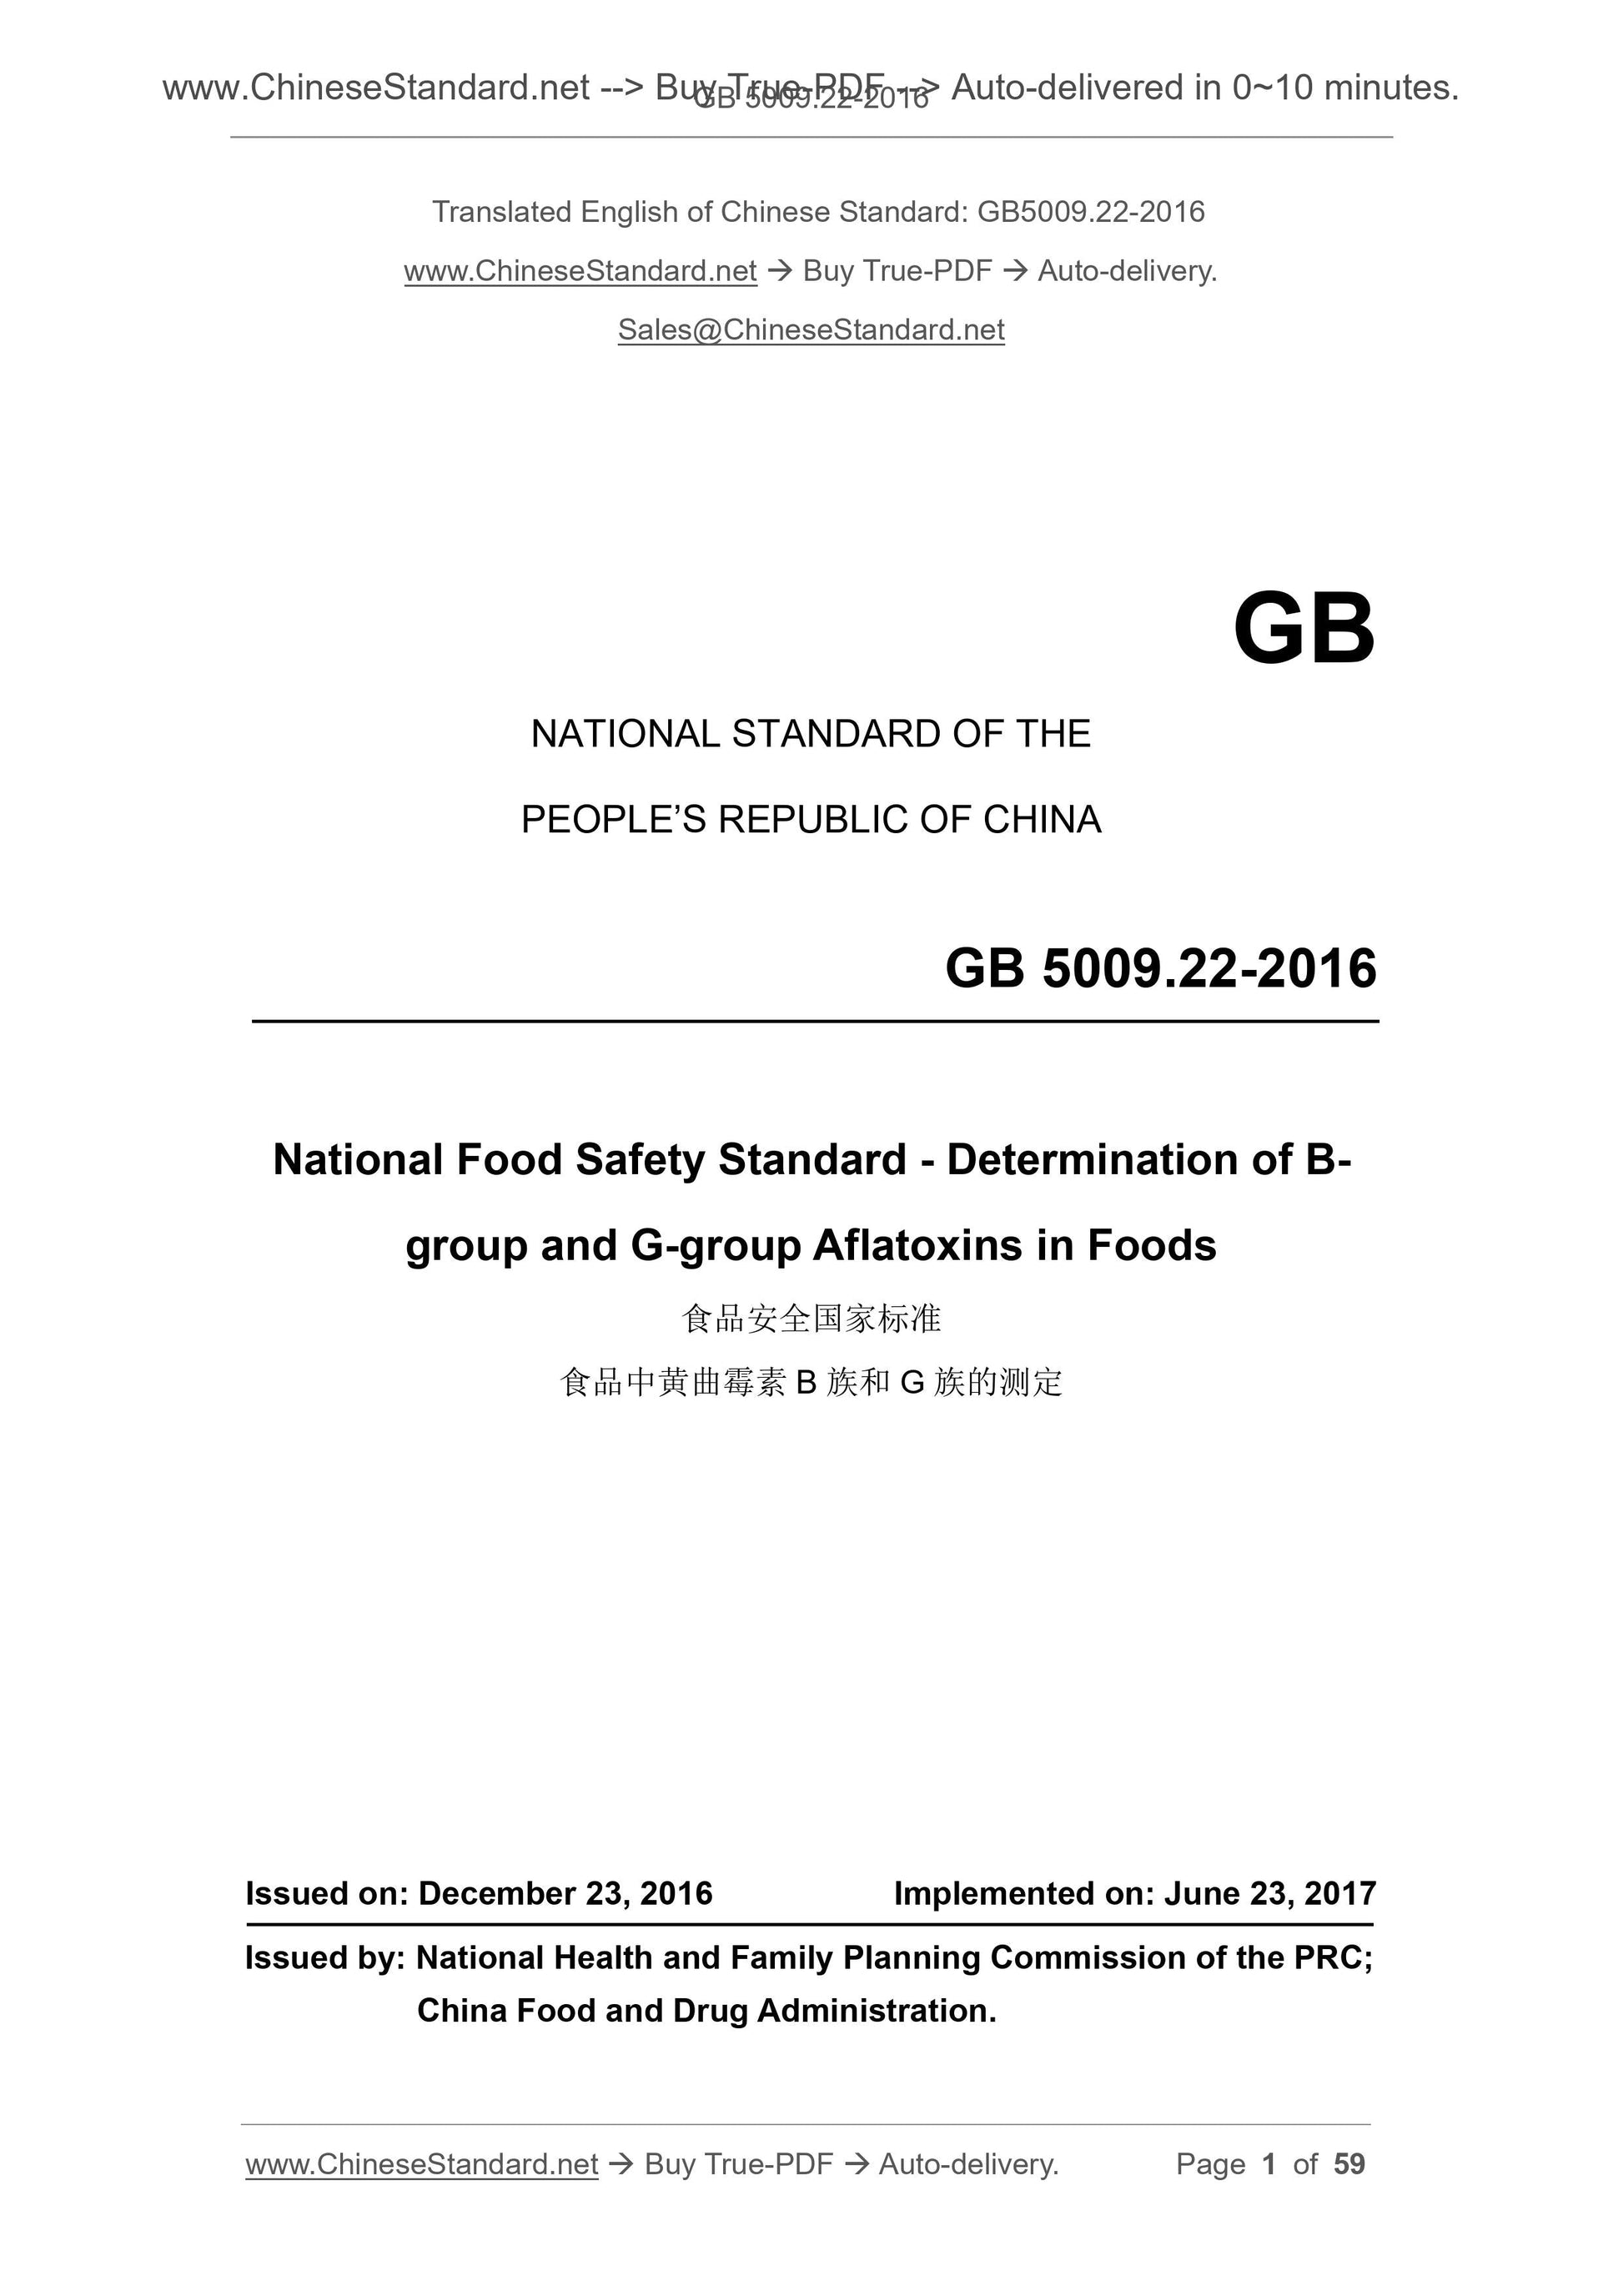 GB 5009.22-2016 Page 1